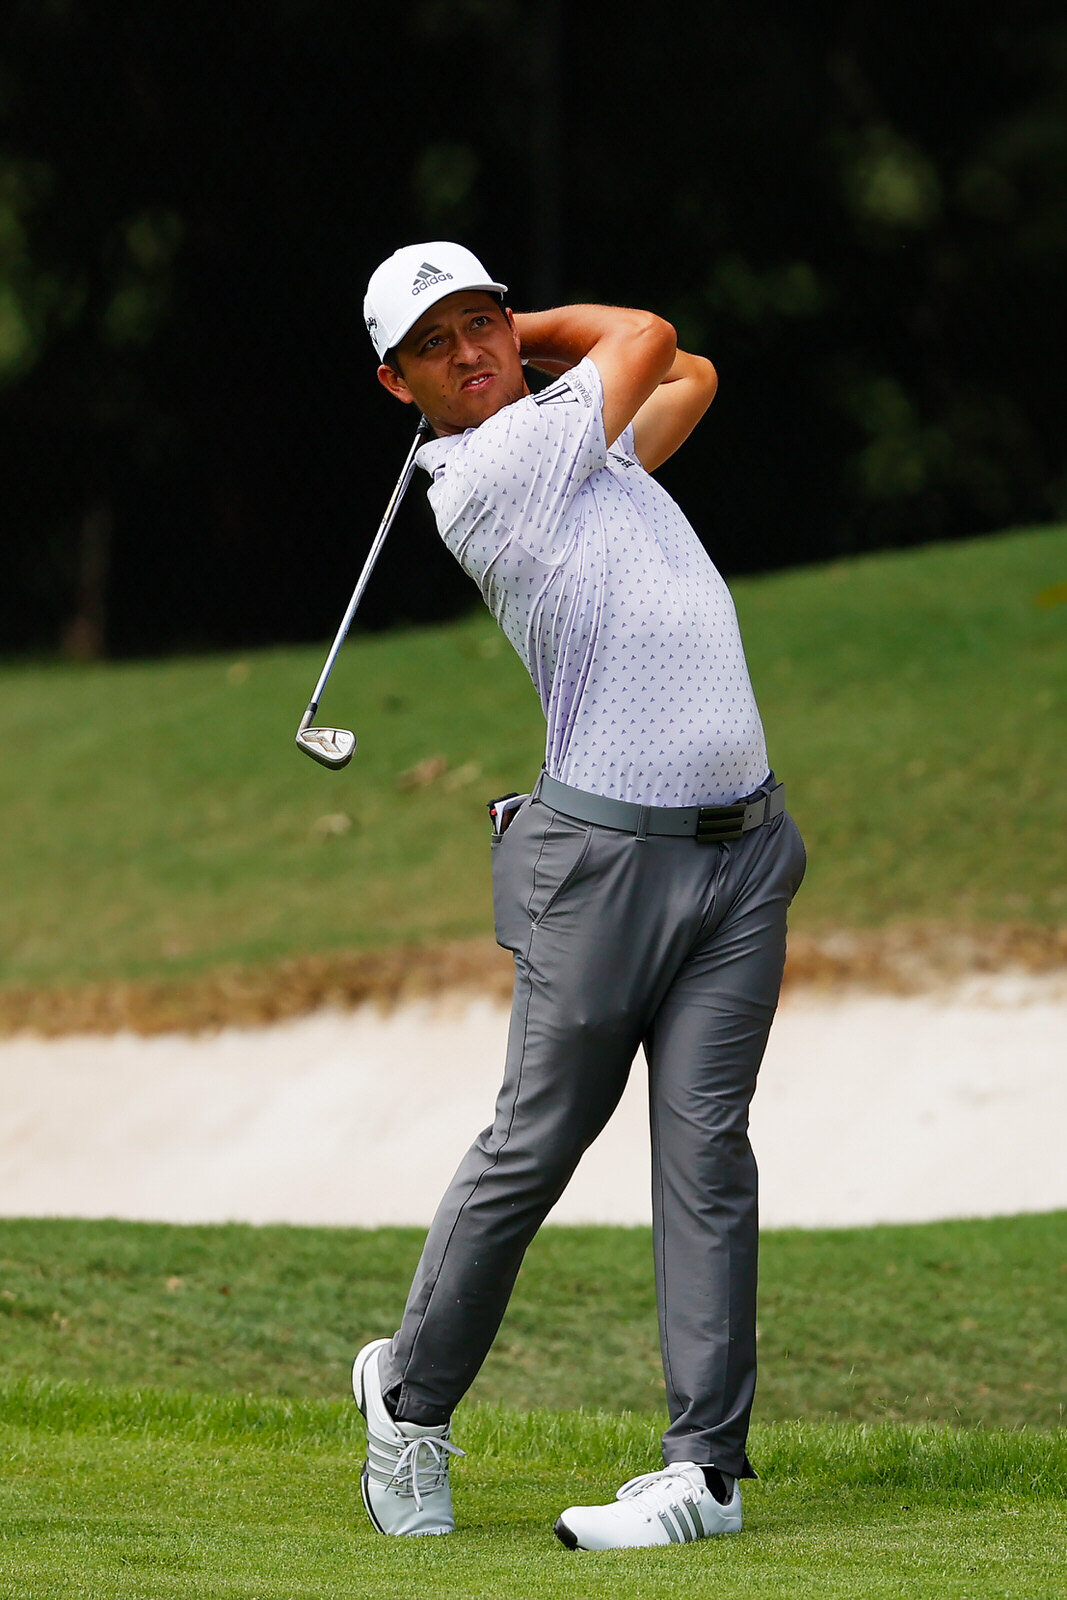  ATLANTA, GEORGIA - SEPTEMBER 04: Xander Schauffele of the United States plays a shot on the first hole during the first round of the TOUR Championship at East Lake Golf Club on September 04, 2020 in Atlanta, Georgia. (Photo by Kevin C. Cox/Getty Ima